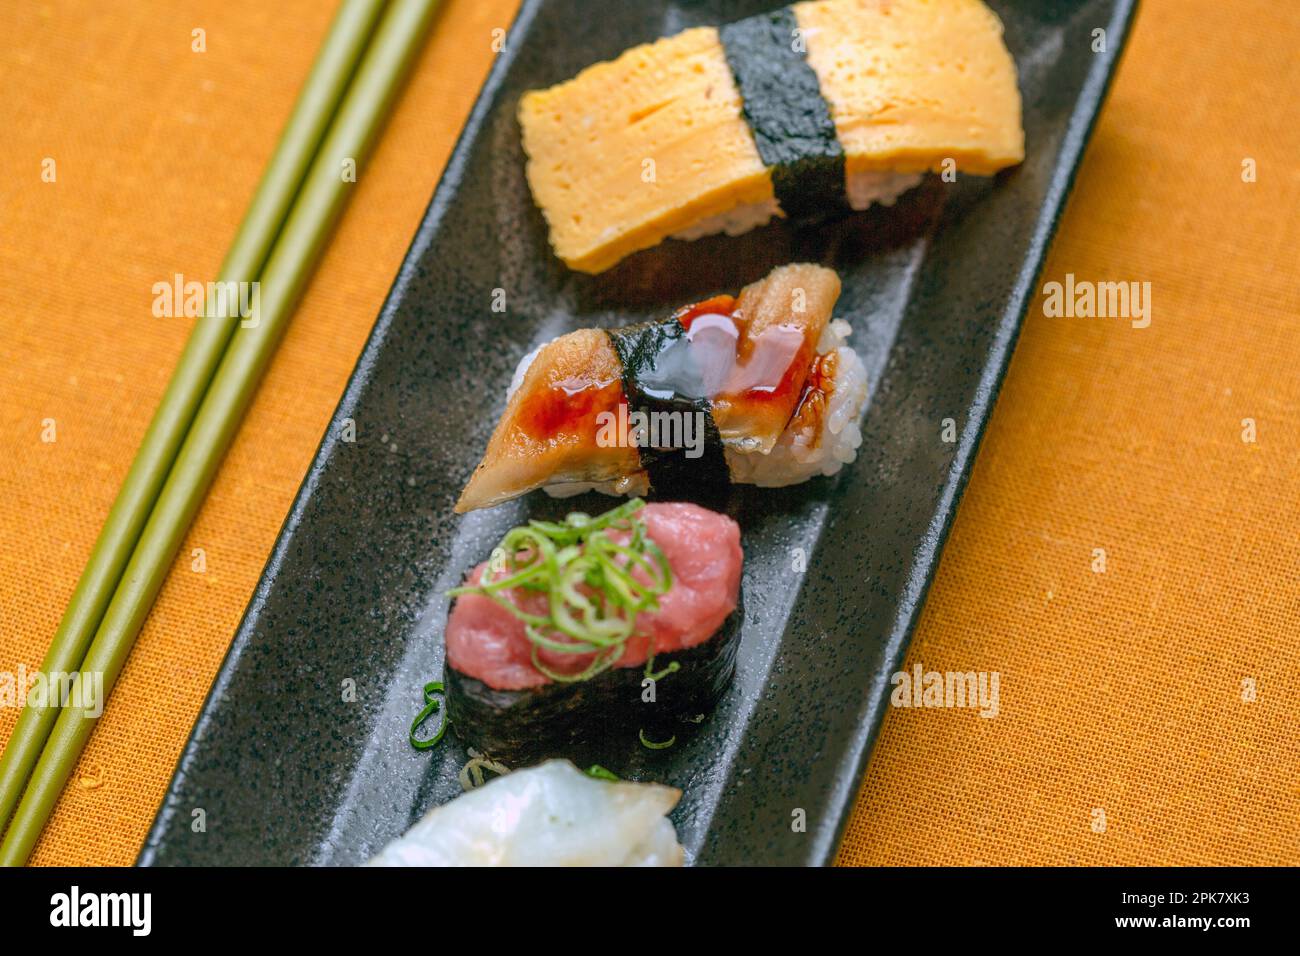 Sushi platter, a selection of raw fish and rice snacks with chopsticks. Stock Photo